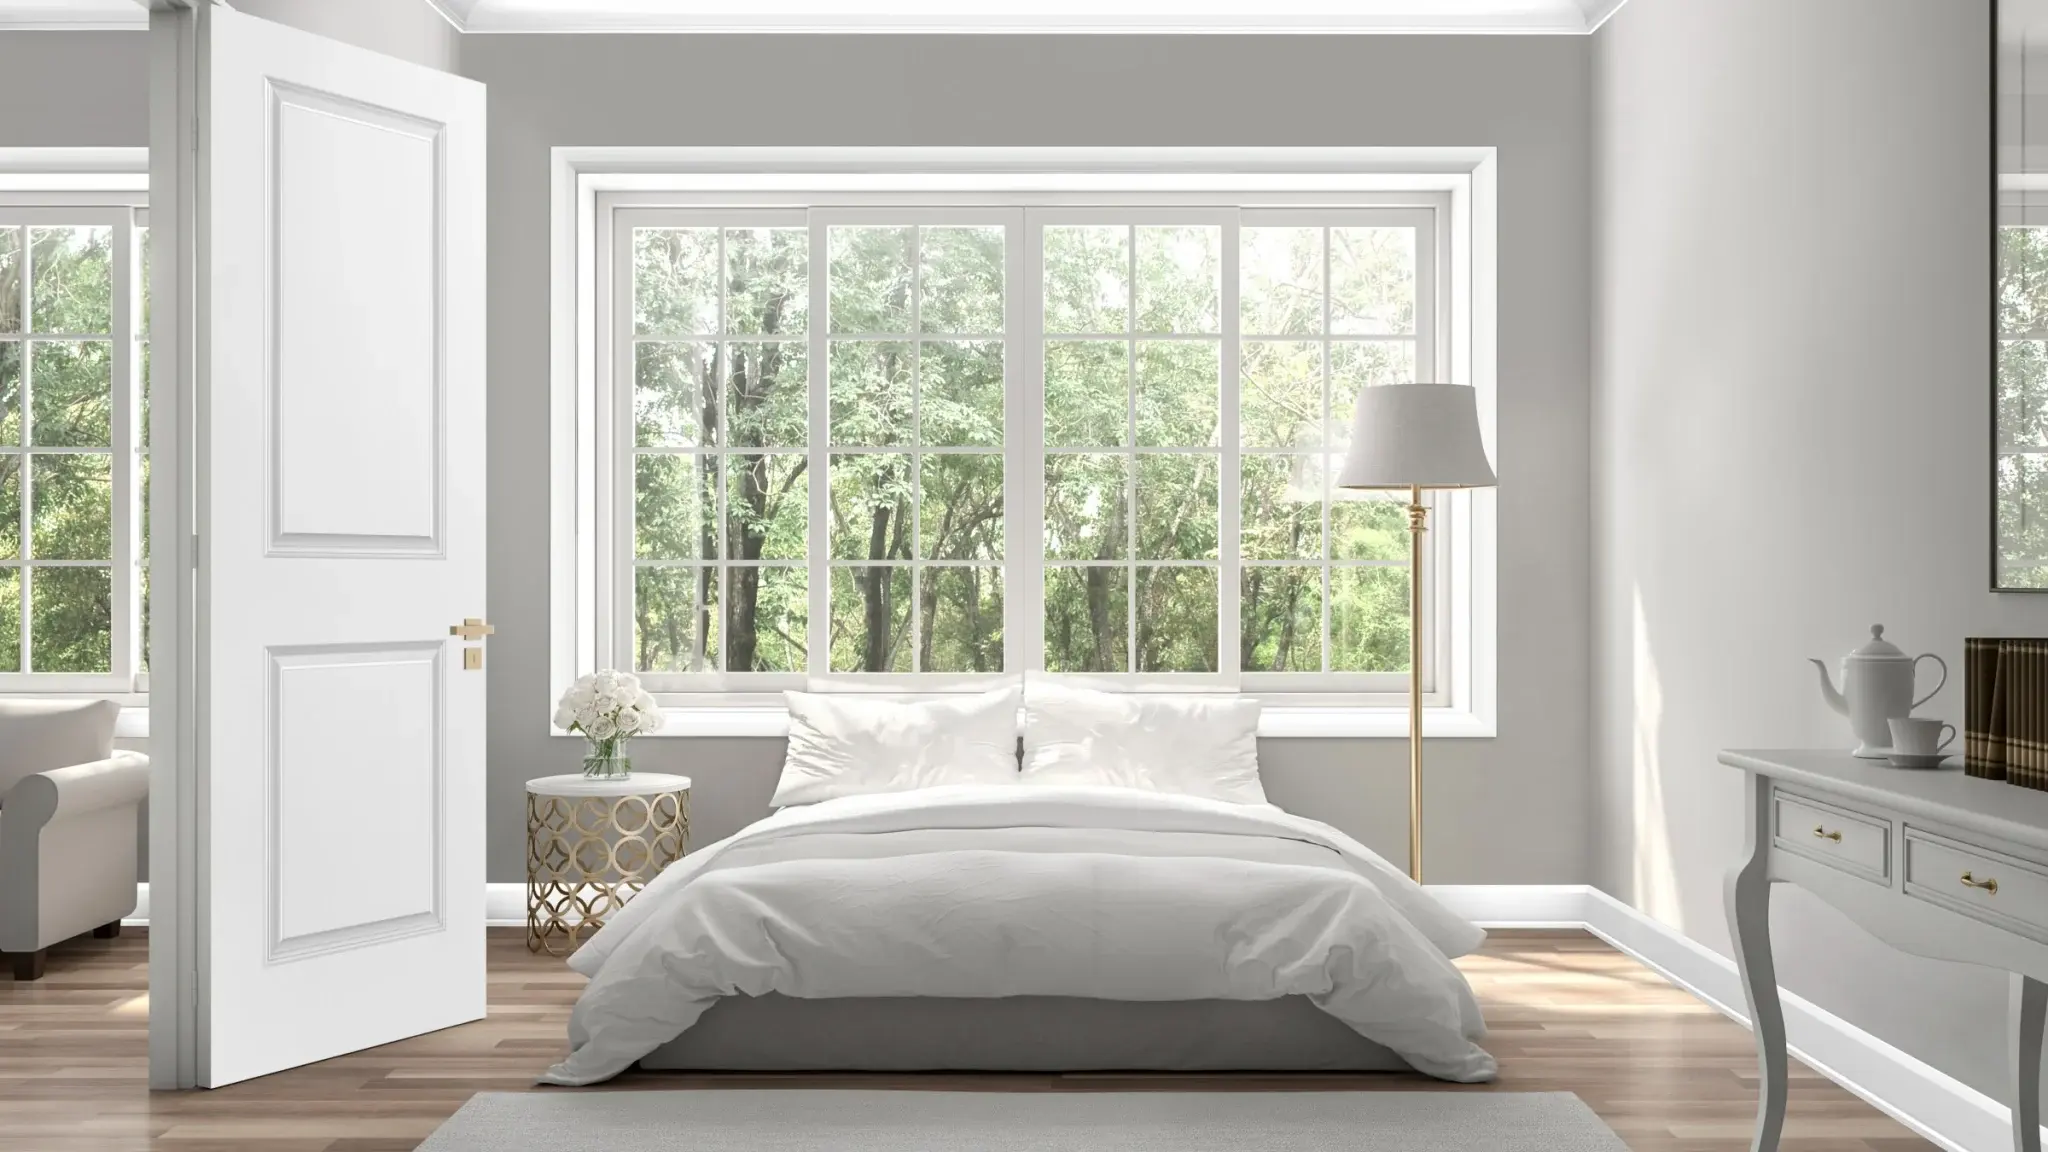 A neutral bedroom white light gray walls, white furniture and bedding. There is a large window above the bed with Polar White Metrie Complete window casing, as well as baseboard and crown. The 2 Panel Metrie Complete pre-painted door opens into the room.